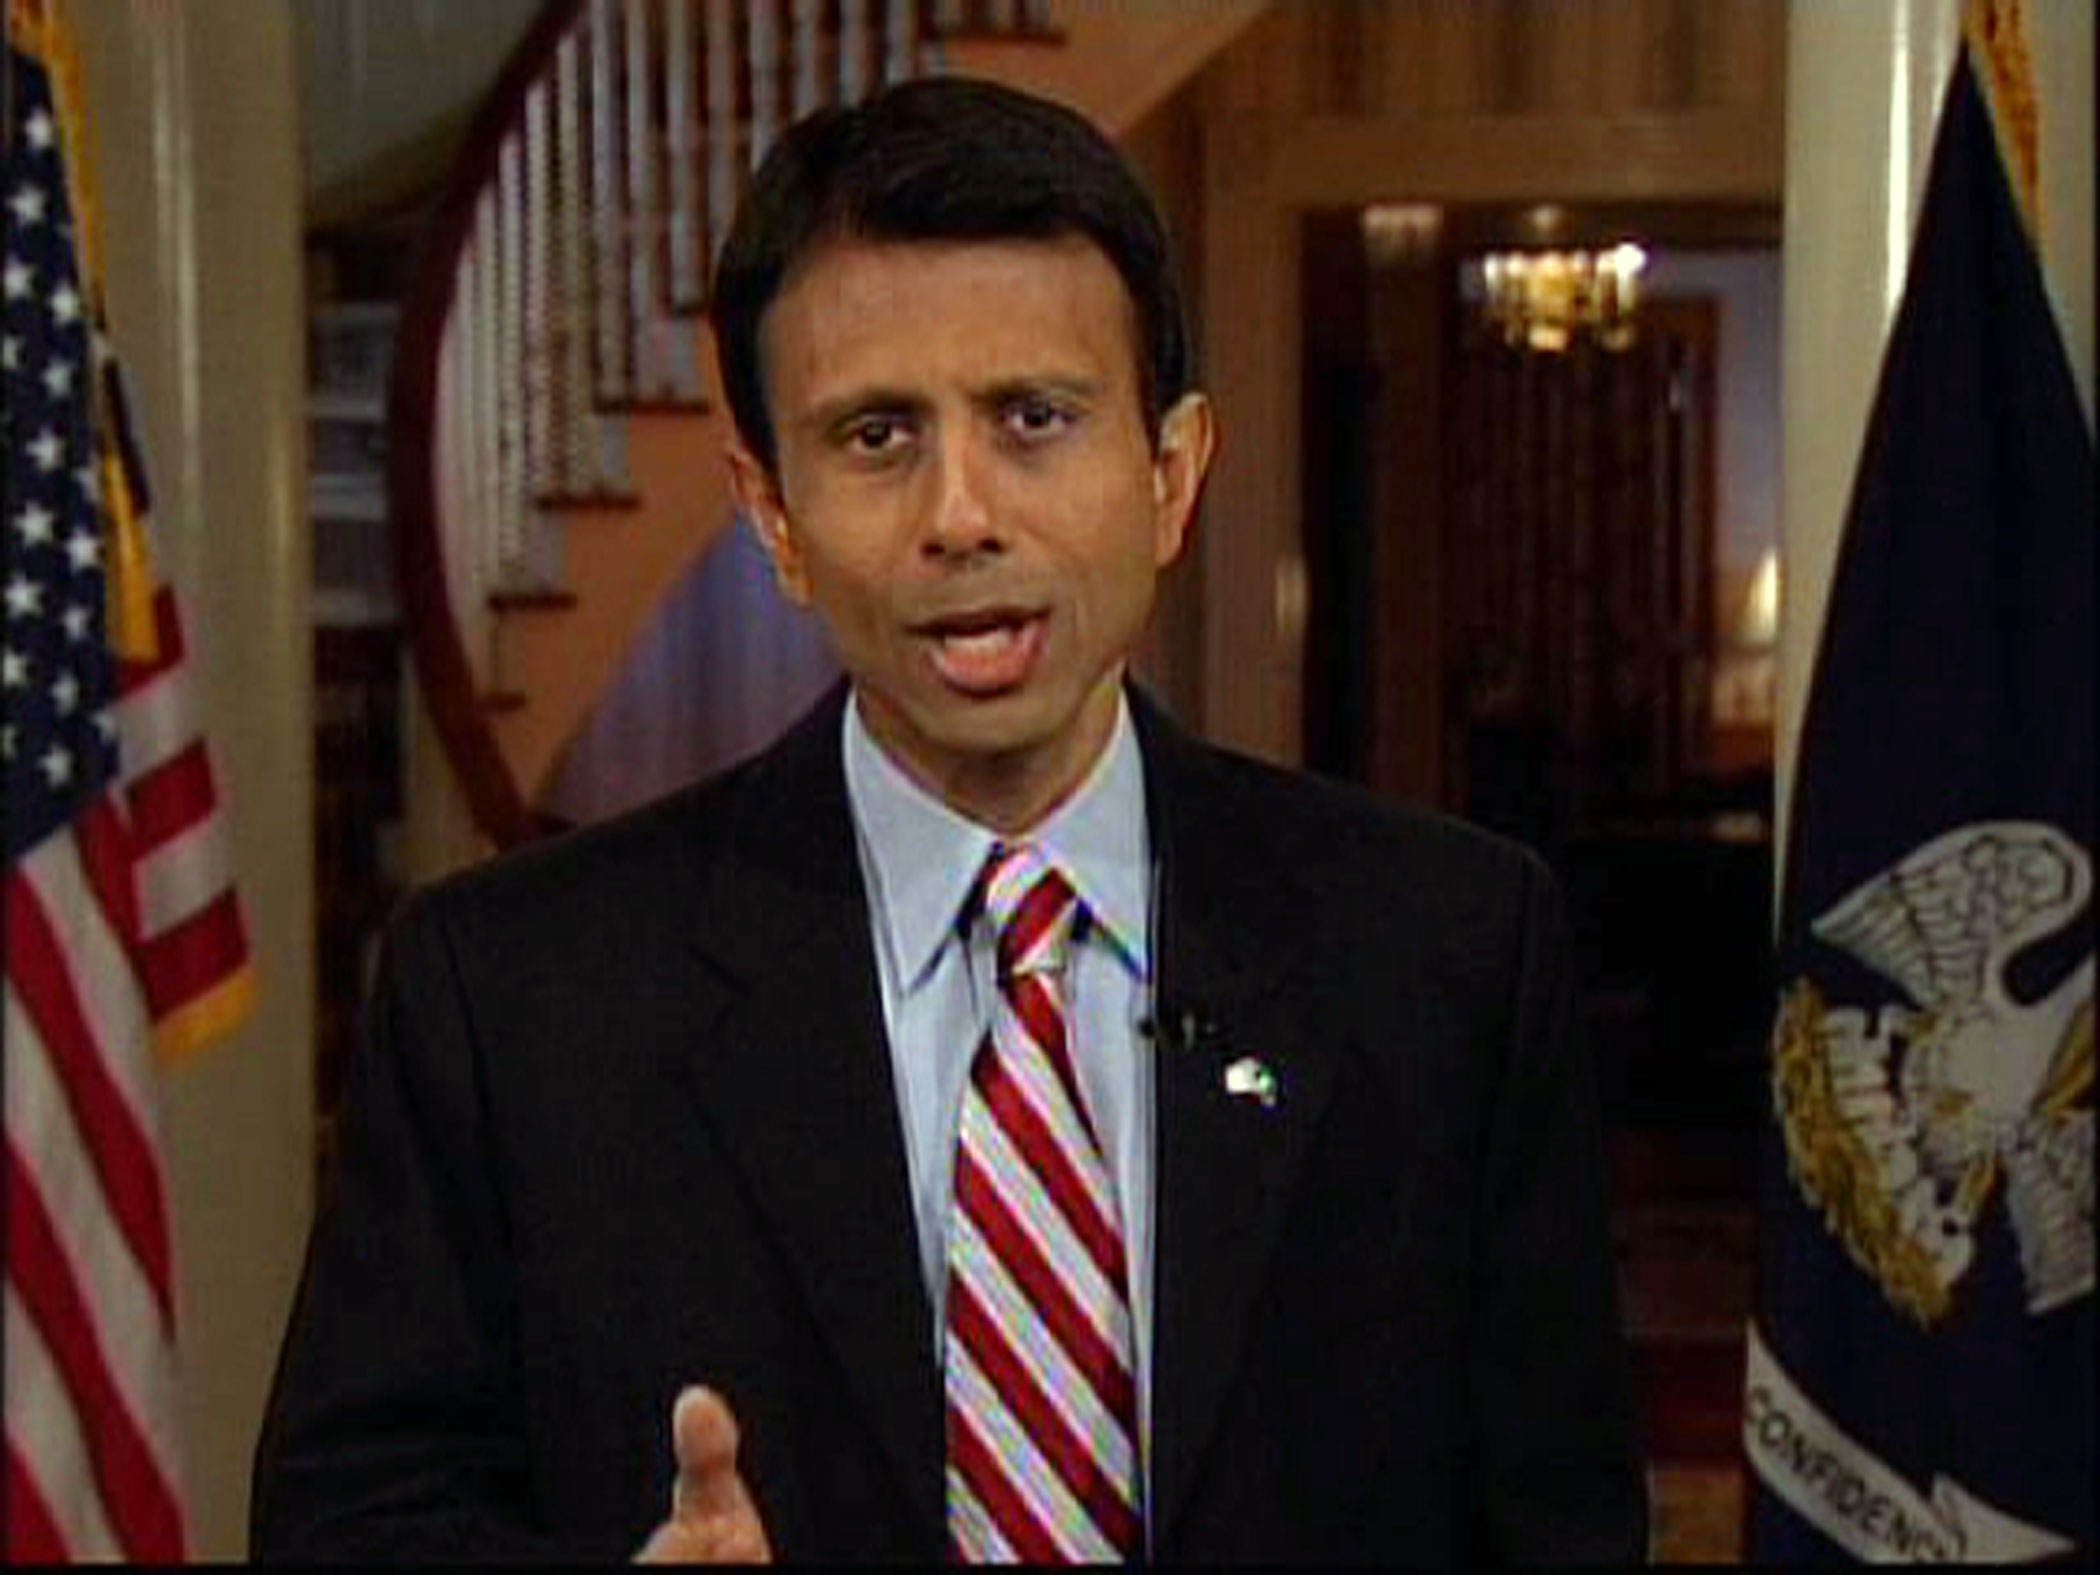 This still from video shows Louisiana Gov. Bobby Jindal in Baton Rouge, La. as he delivers the Republican Party's official response to President Barack Obama's State of the Union address to a joint session of Congress on Tuesday Feb. 24, 2009.